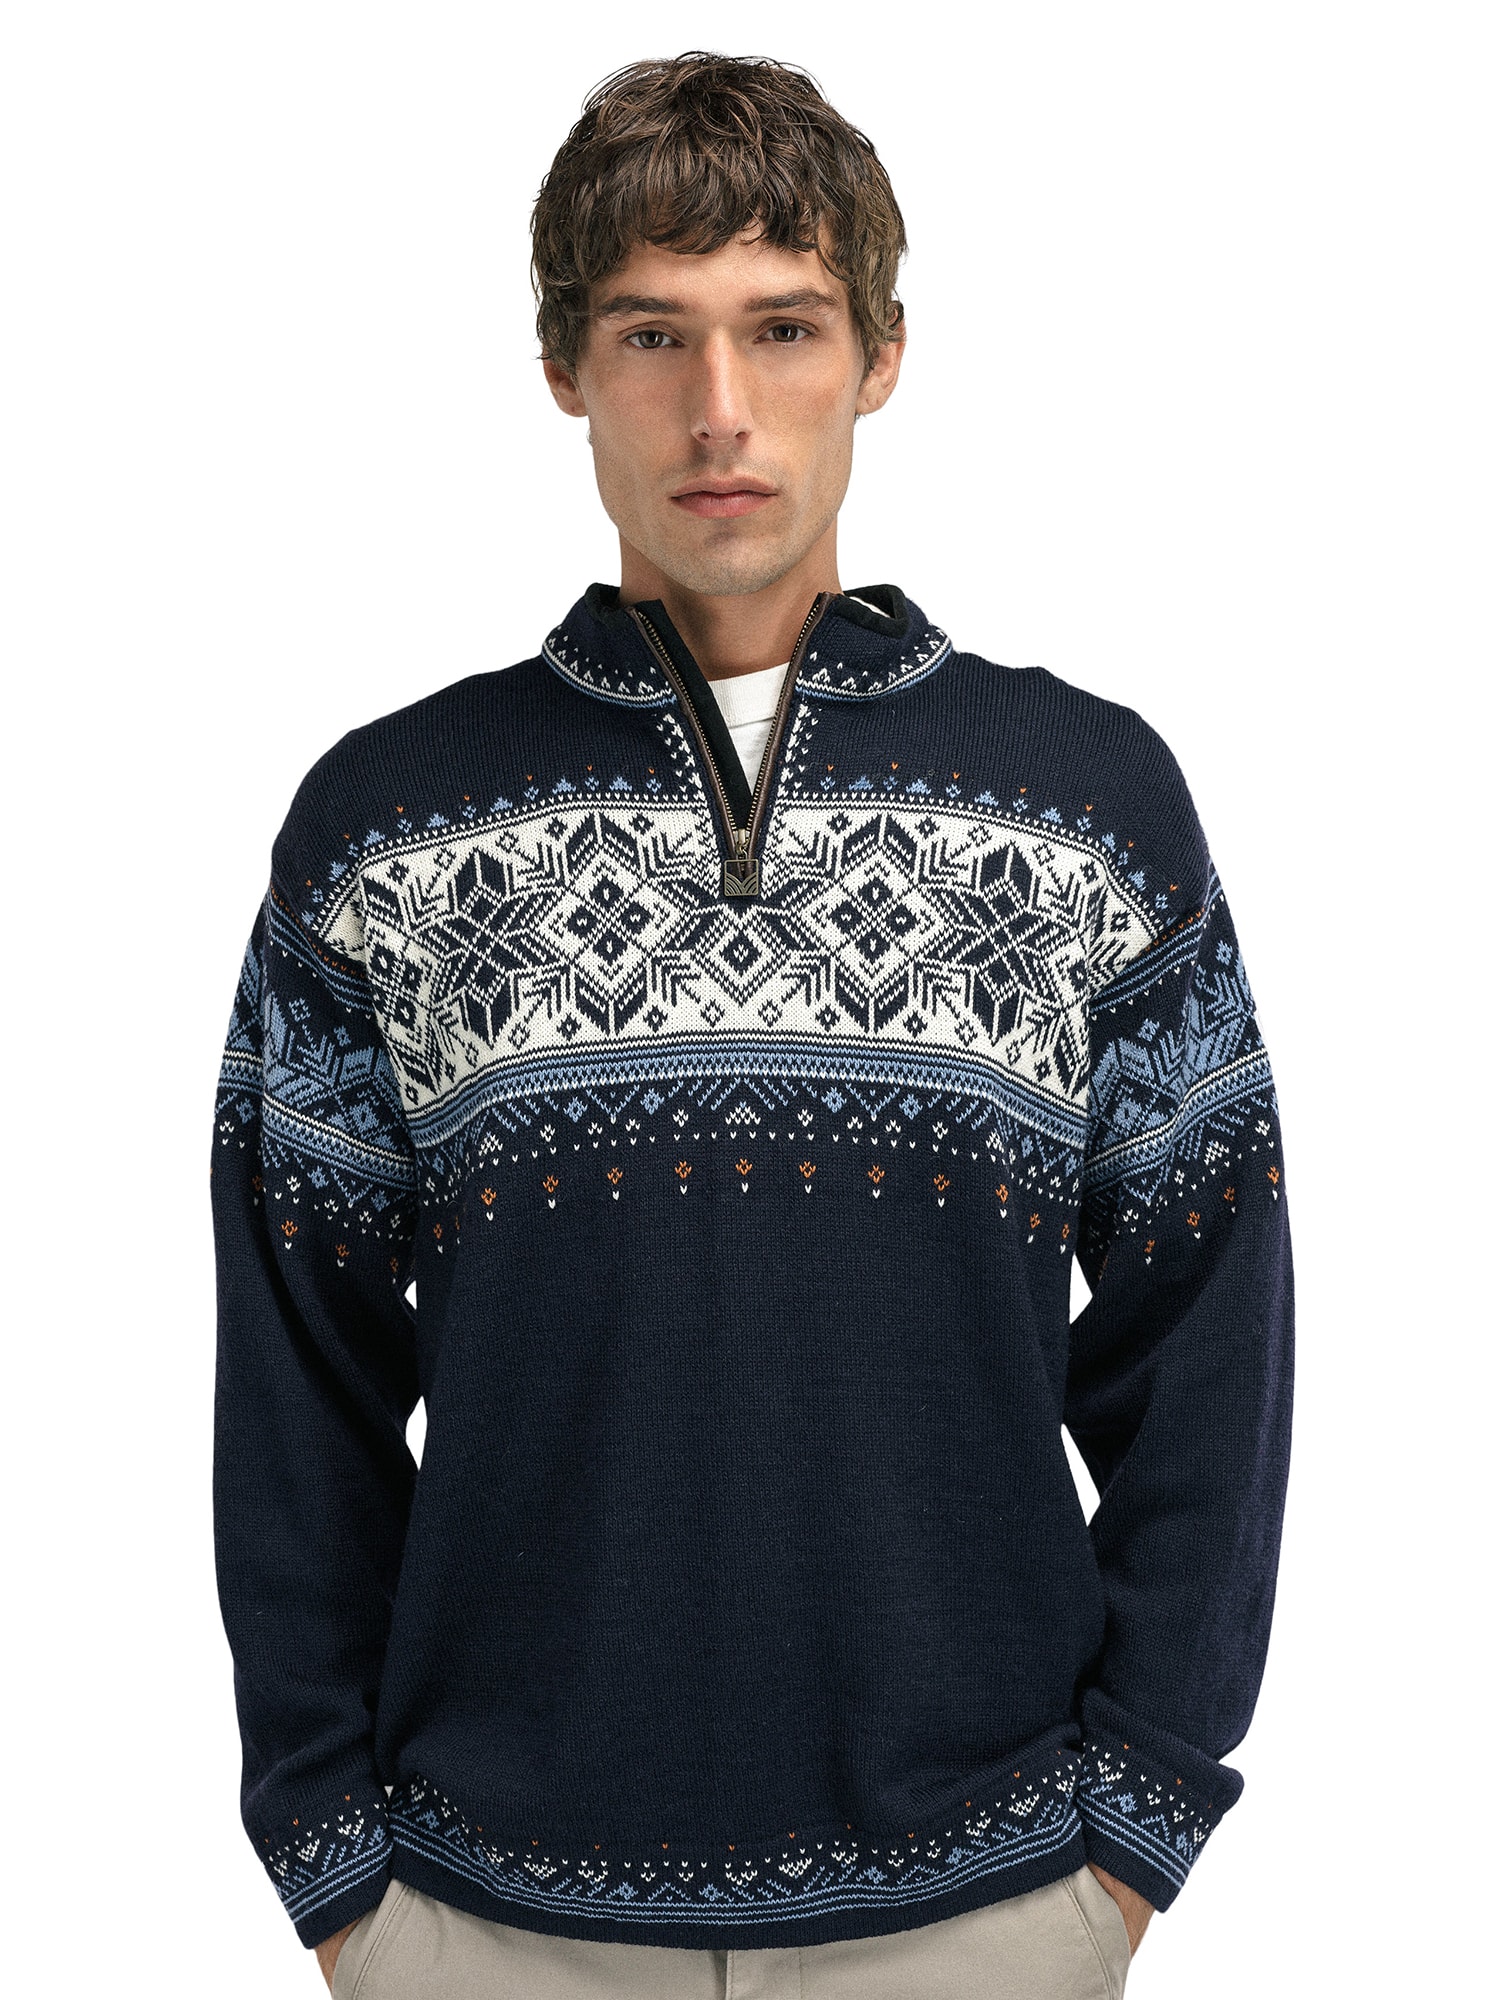 Blyfjell Knit Sweater - Men - Navy - Dale of Norway - Dale of Norway